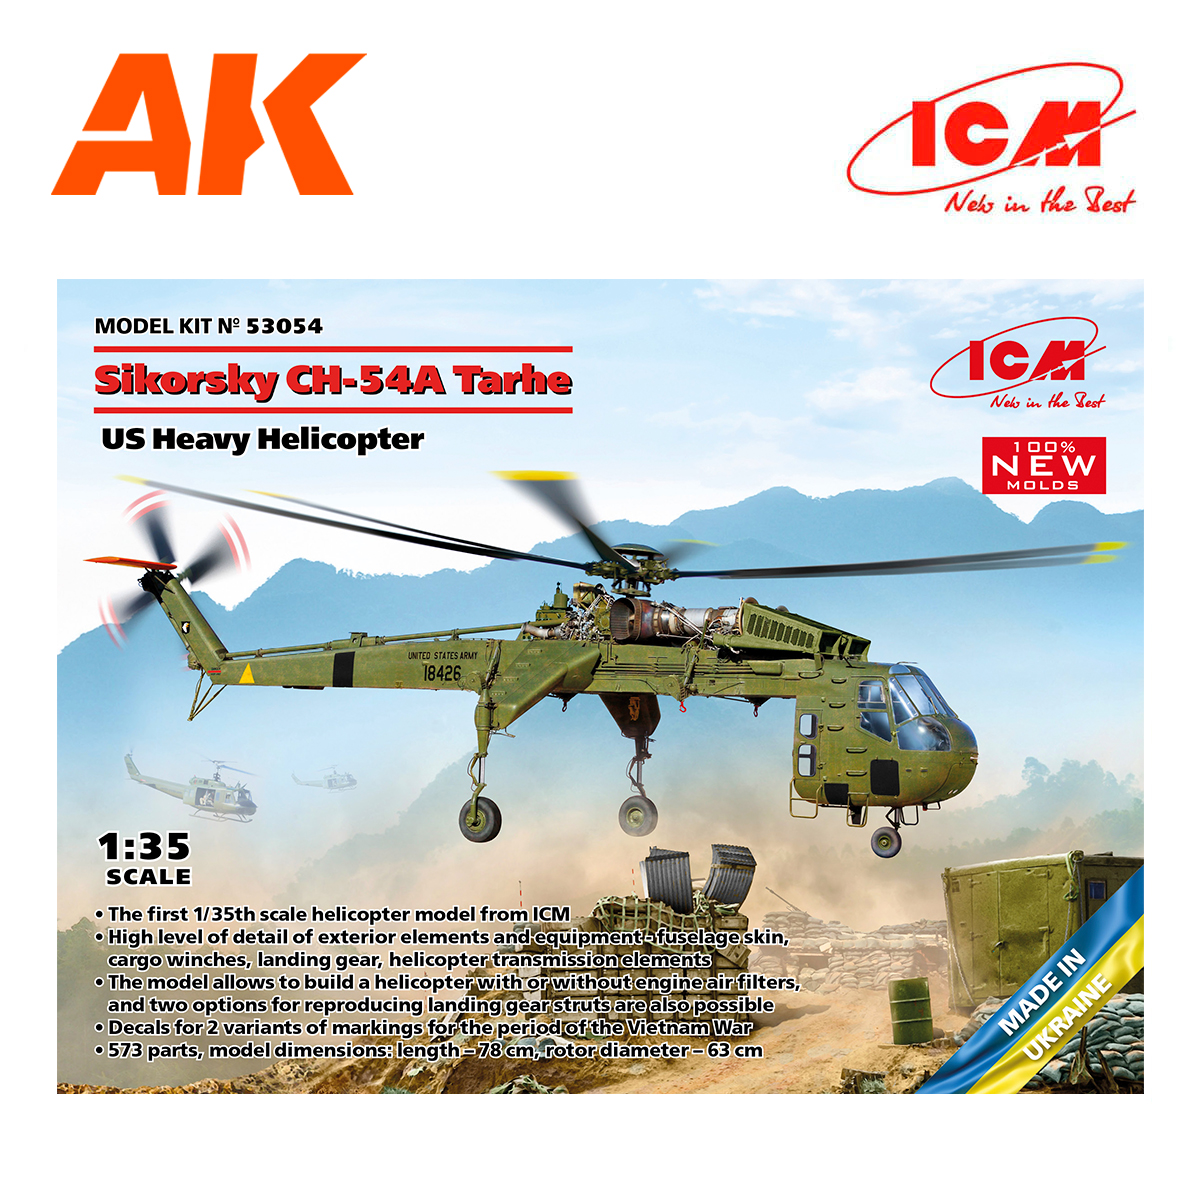 Sikorsky CH-54A Tarhe, US Heavy Helicopter (100% new molds) 1/35